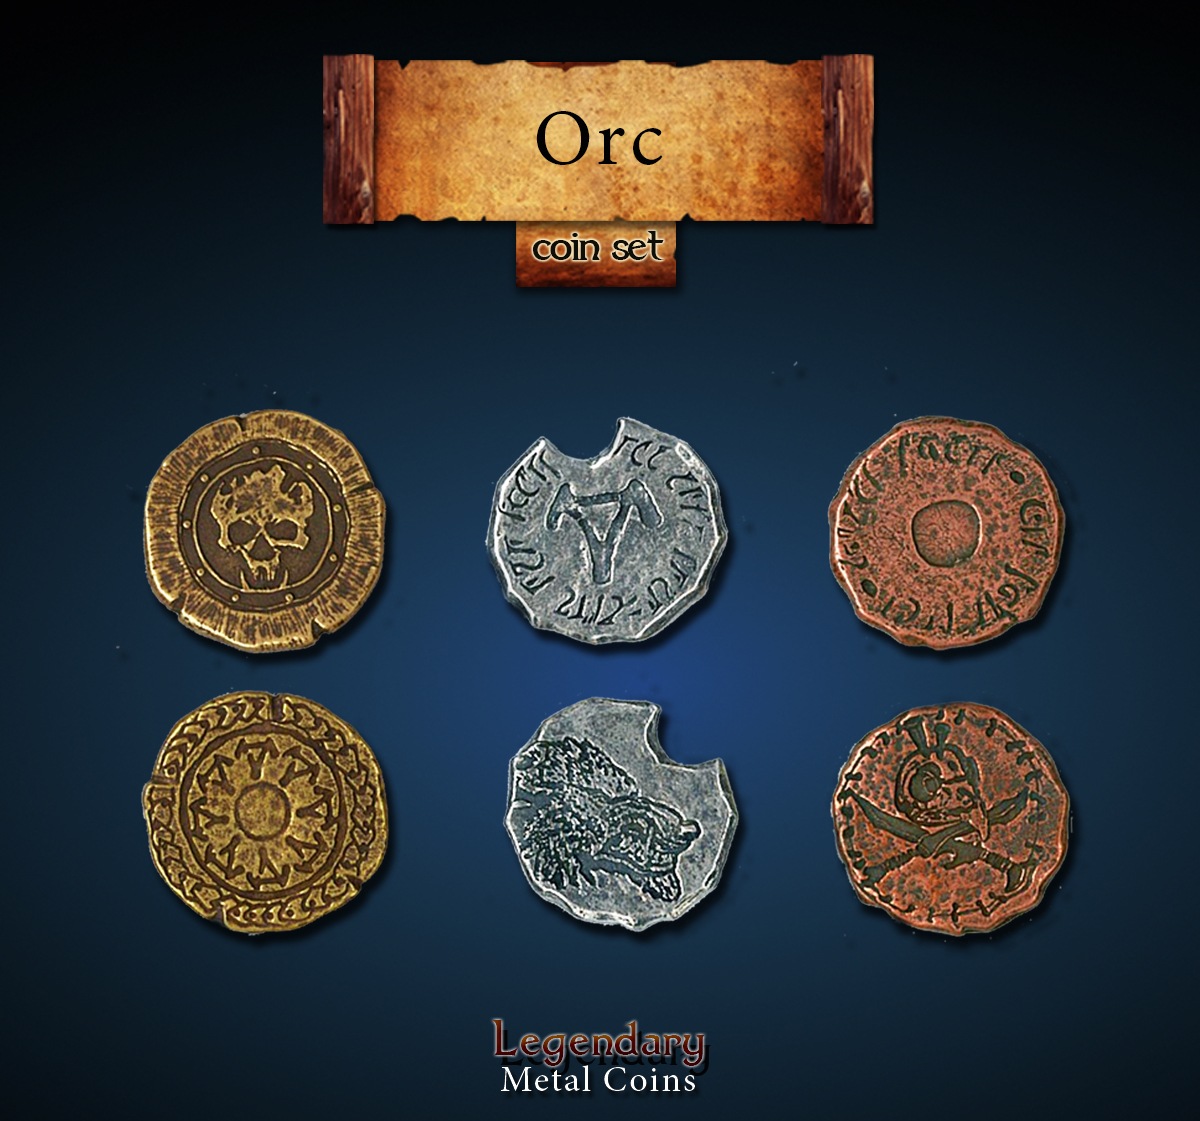 Orc Coin Set Legendary Metal Coins